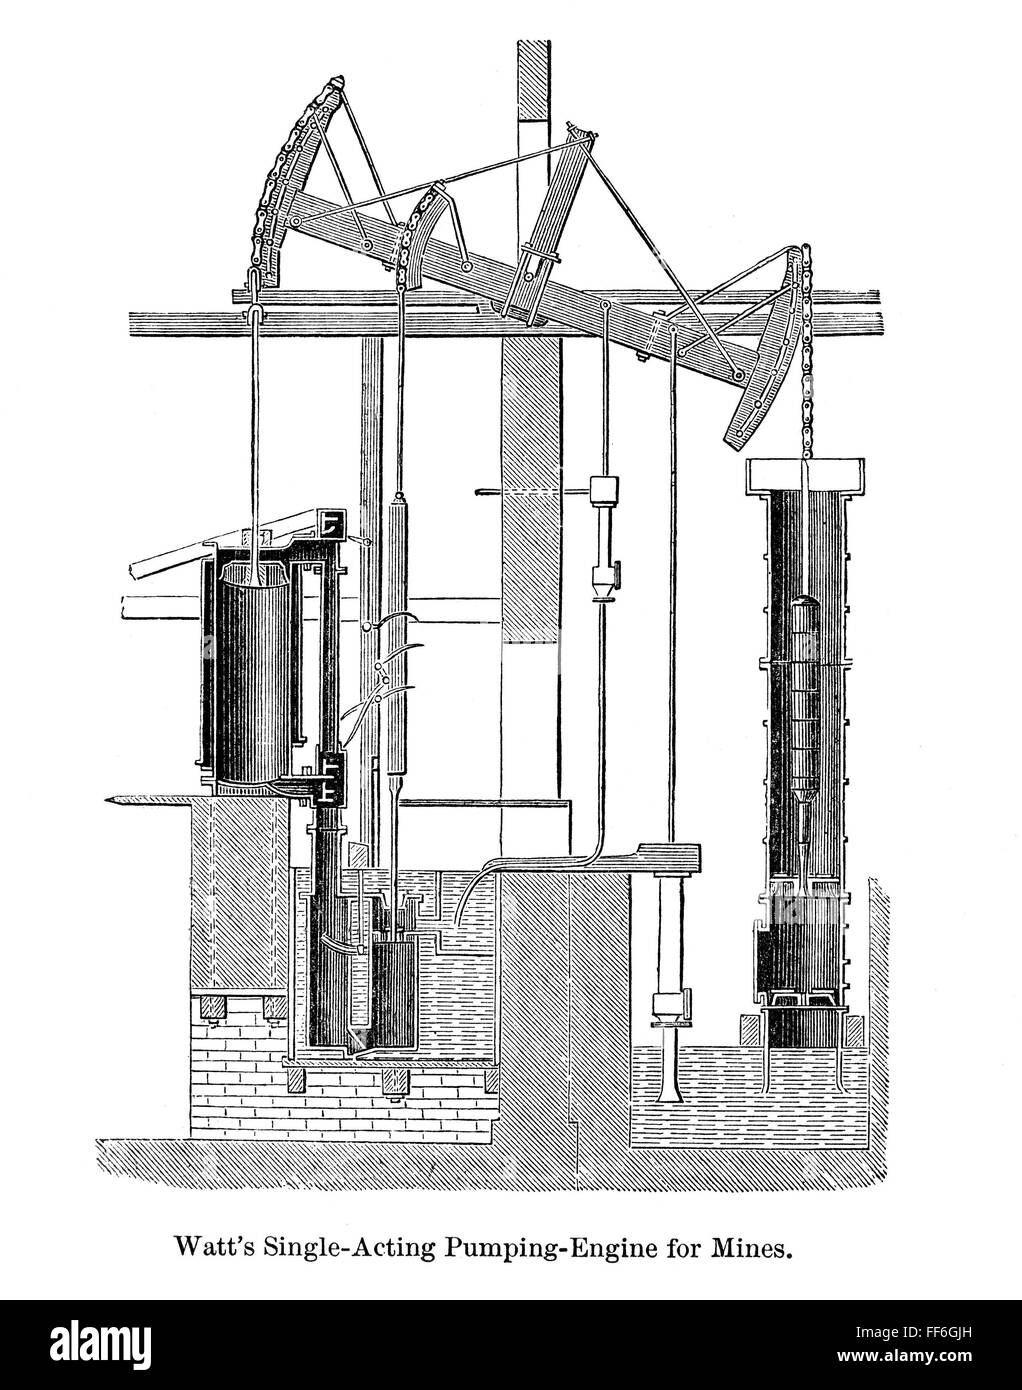 James watt and the invention of the steam engine фото 66